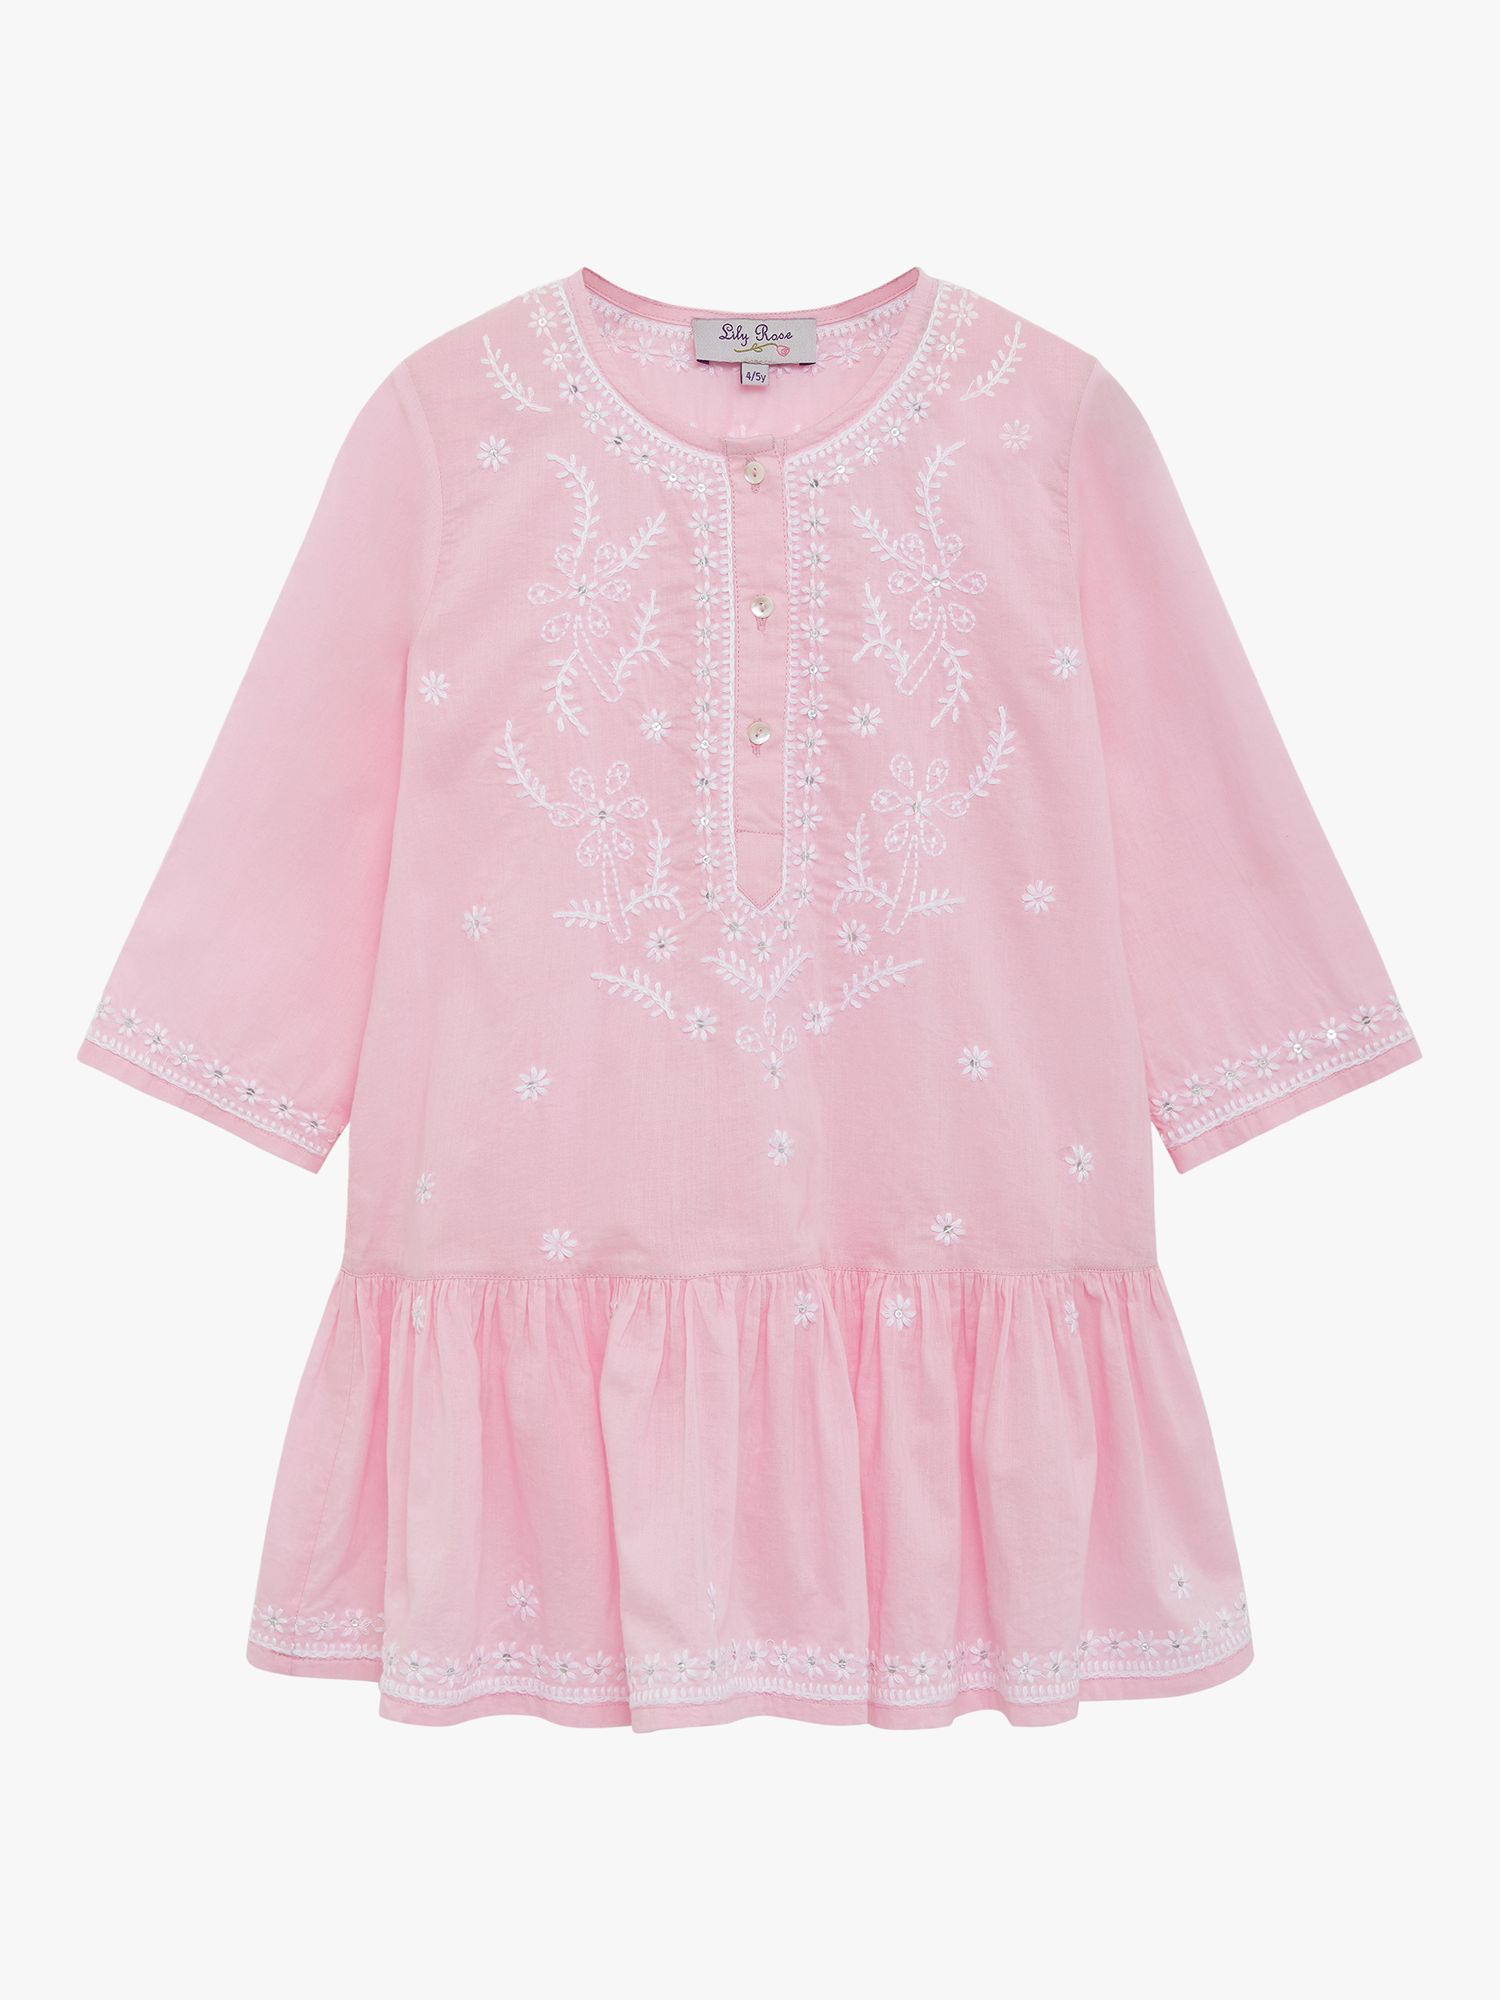 Trotters Lily Rose Kids' Embroidered Cotton Kaftan, Pale Pink/White, 2-3 years